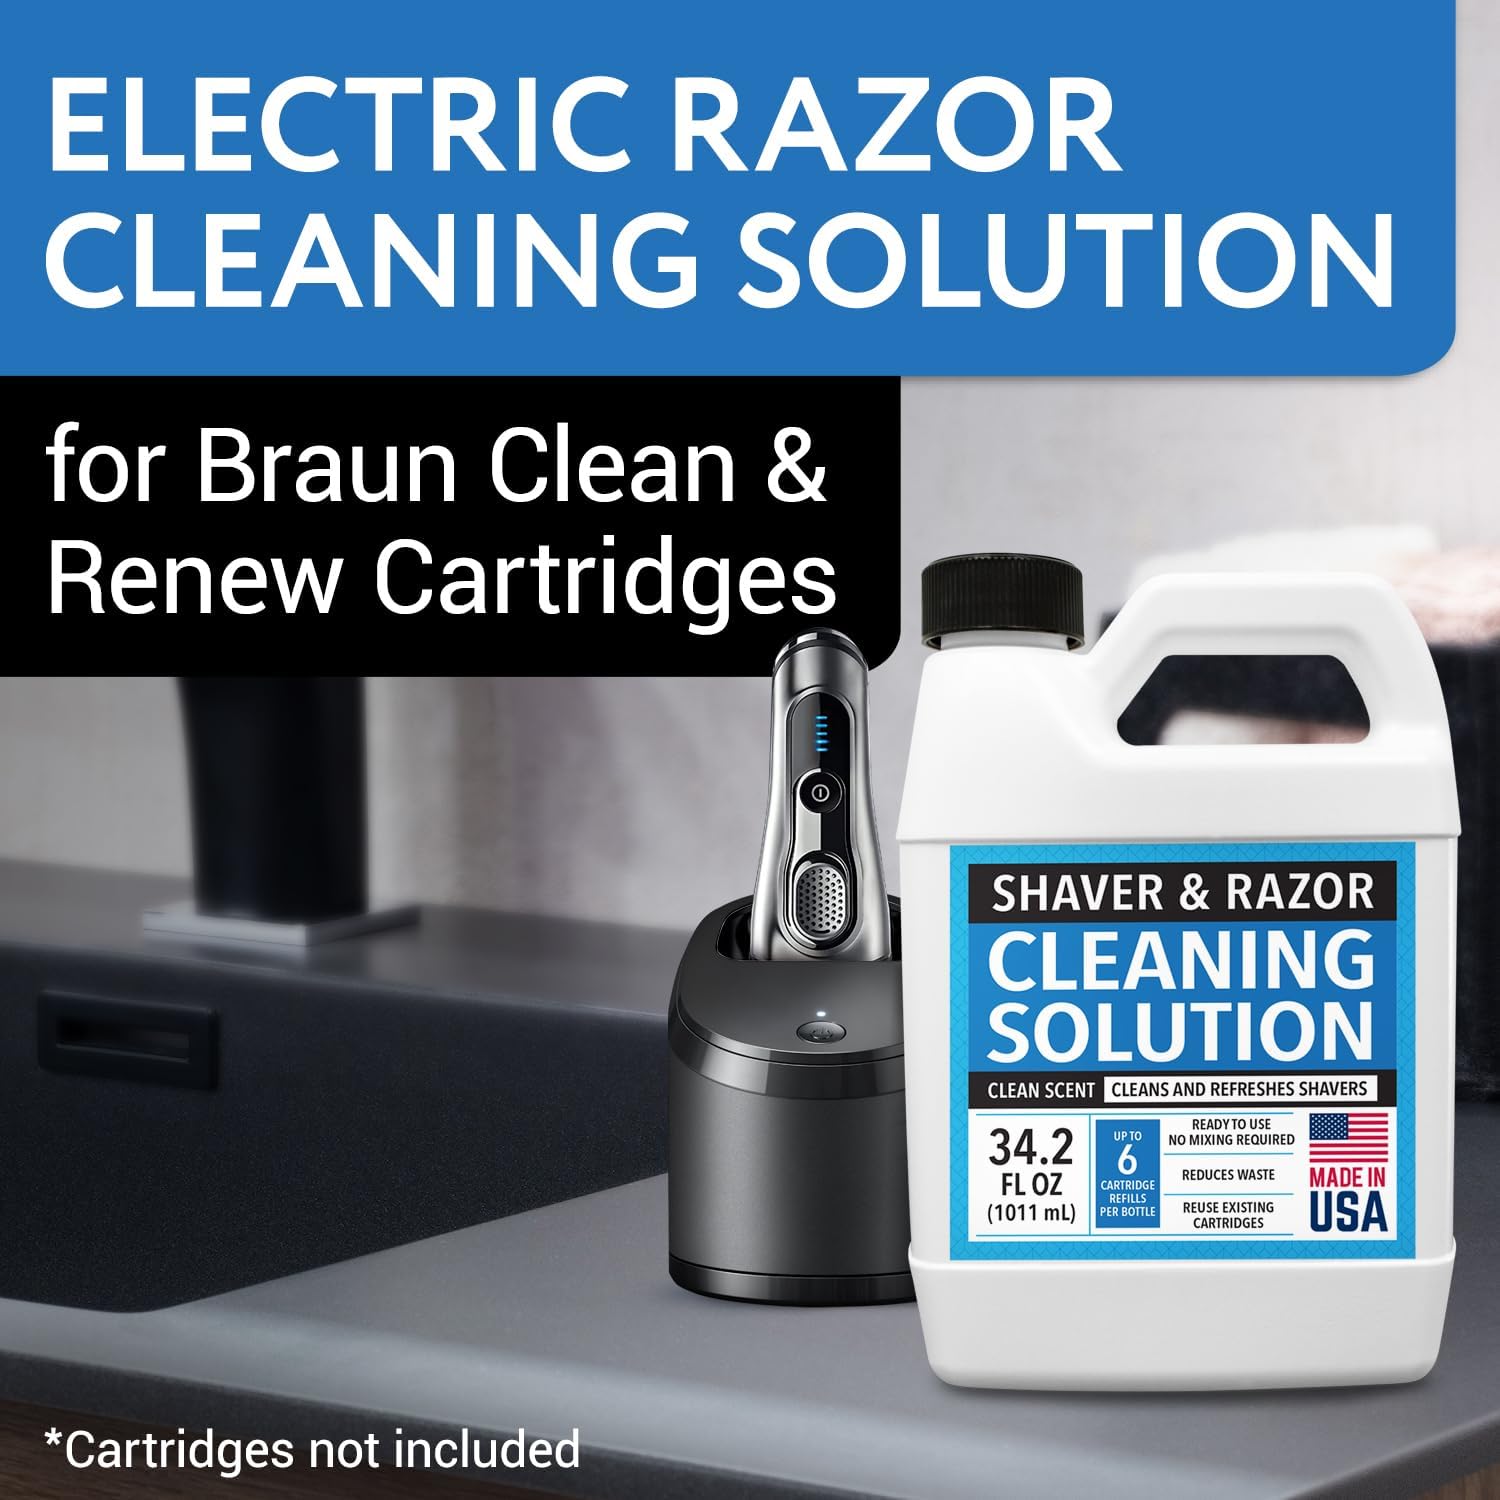 IMPRESA Electric Shaver Cleaning Solution for Braun Clean & Renew Refill  Cartridges - 6 Uses